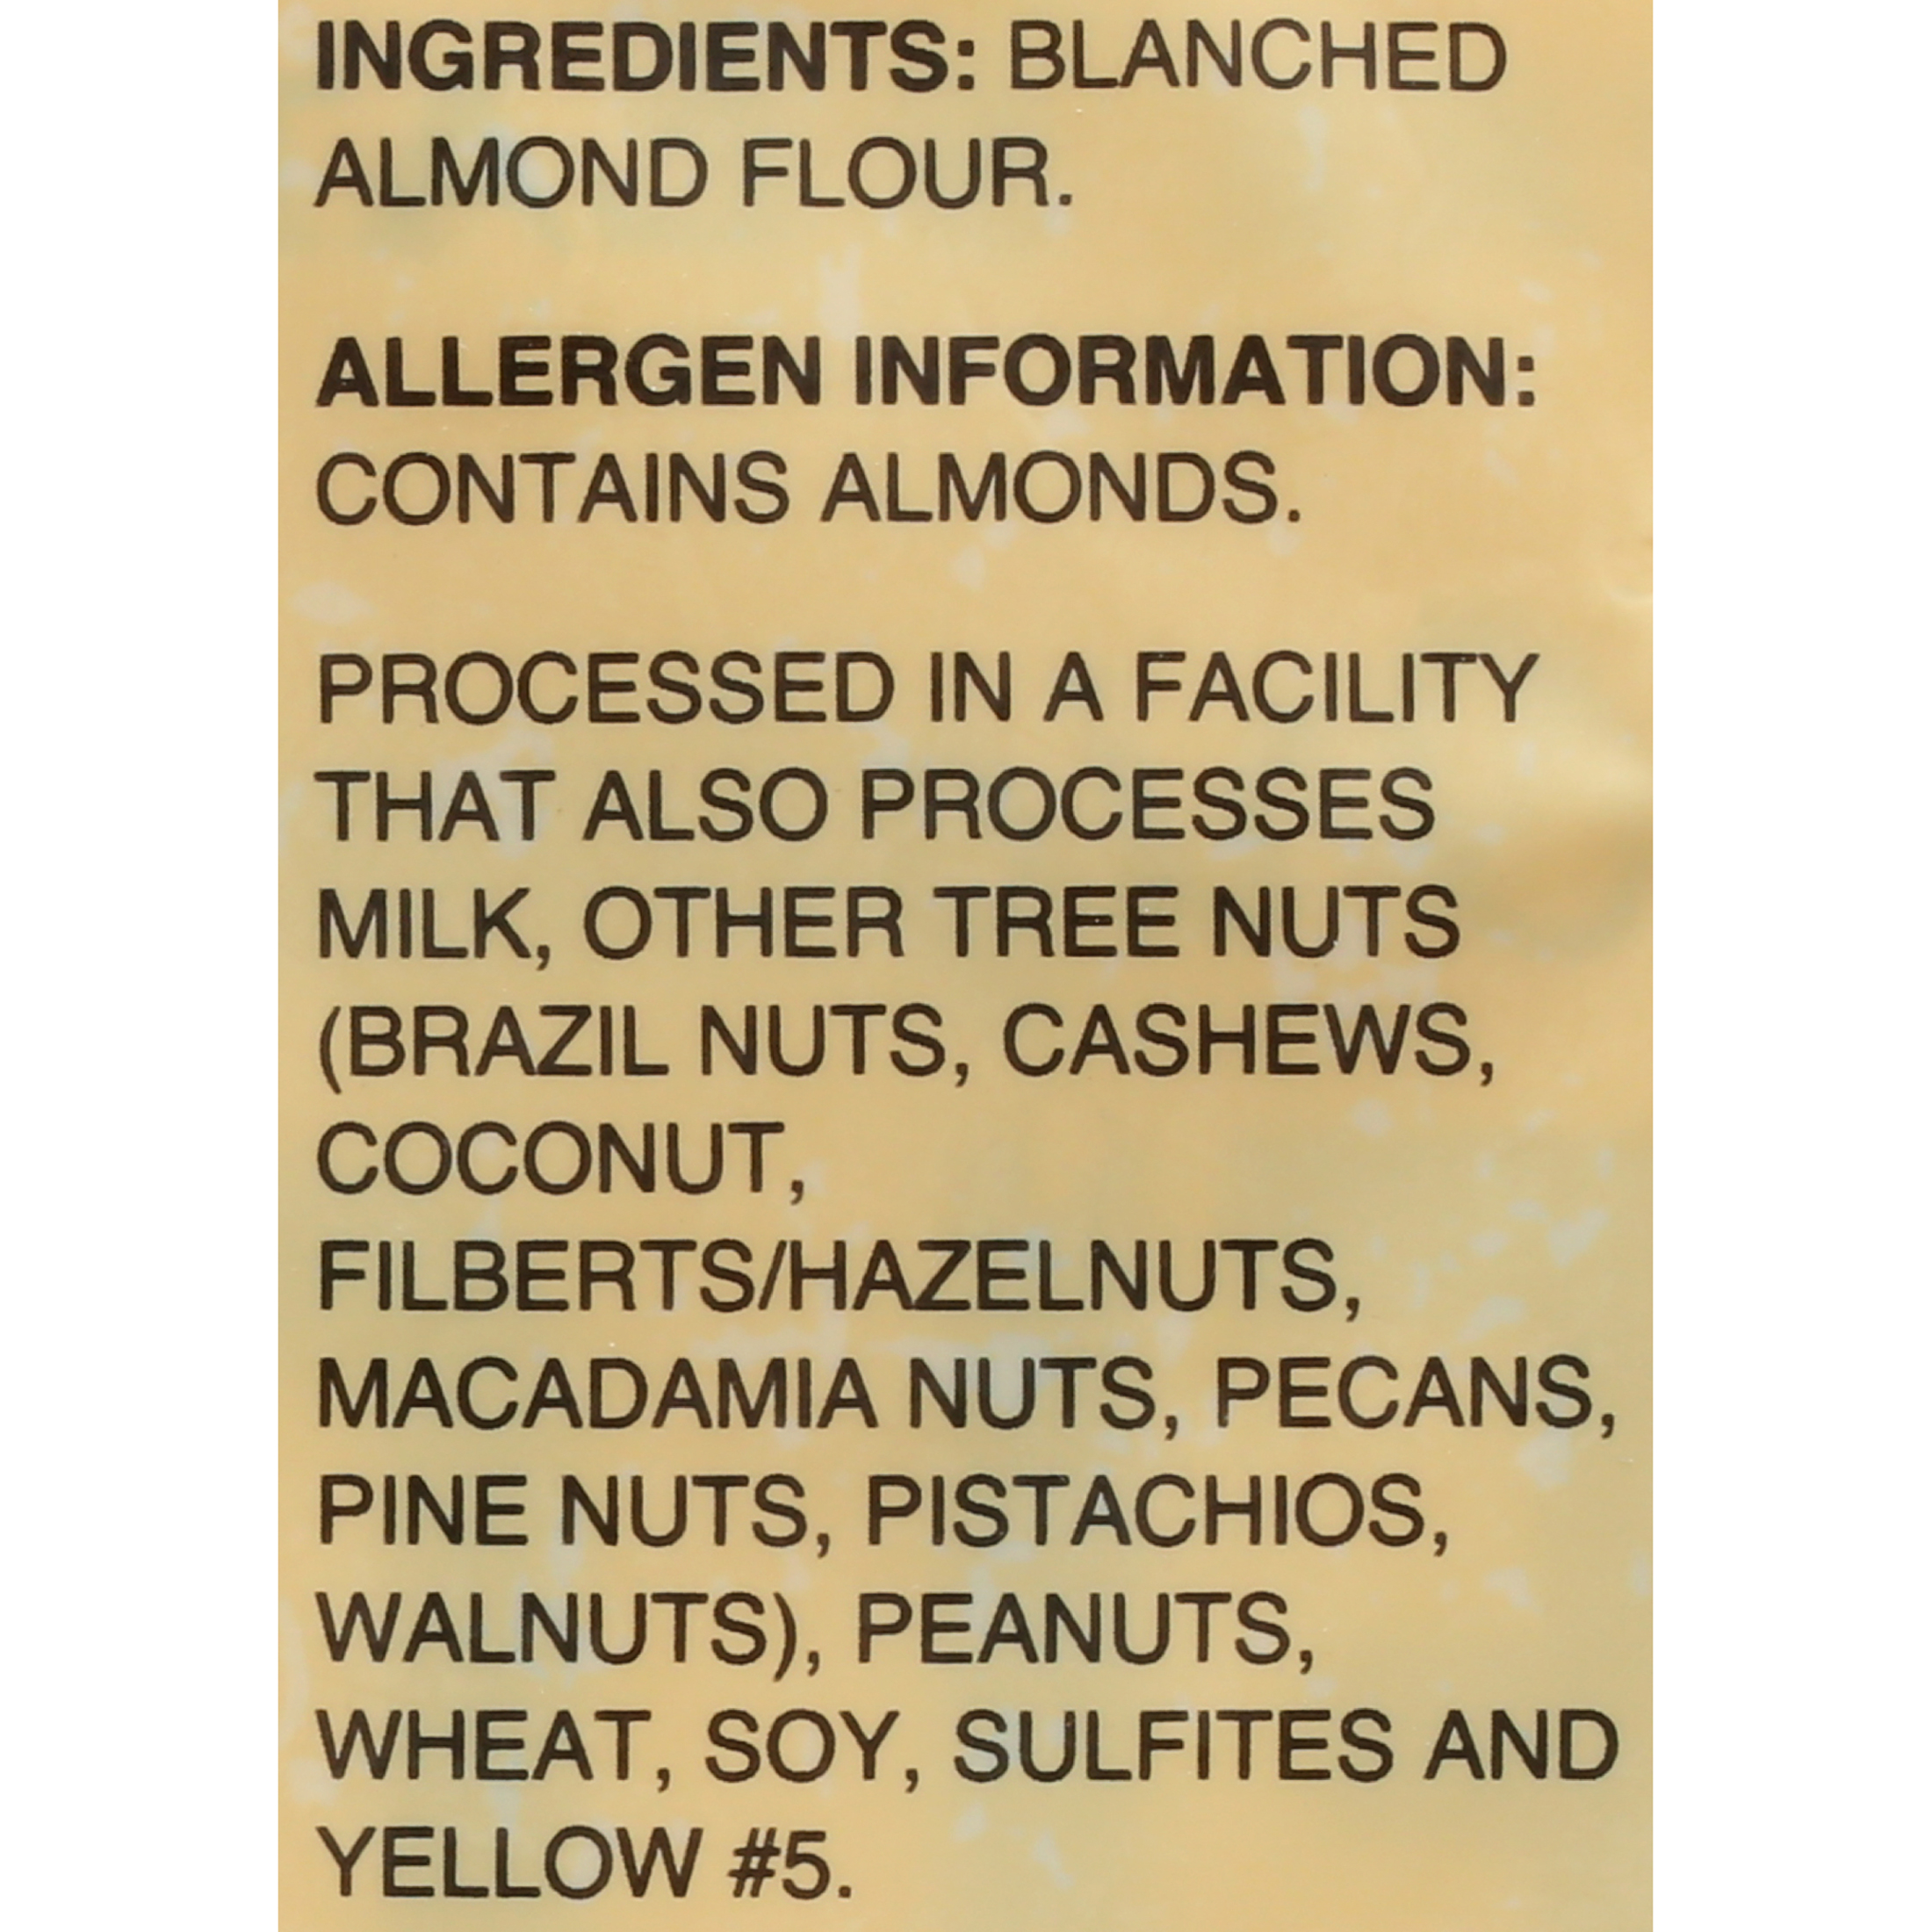 Nature's Eats Blanched Almond Flour, 32 oz - image 5 of 8